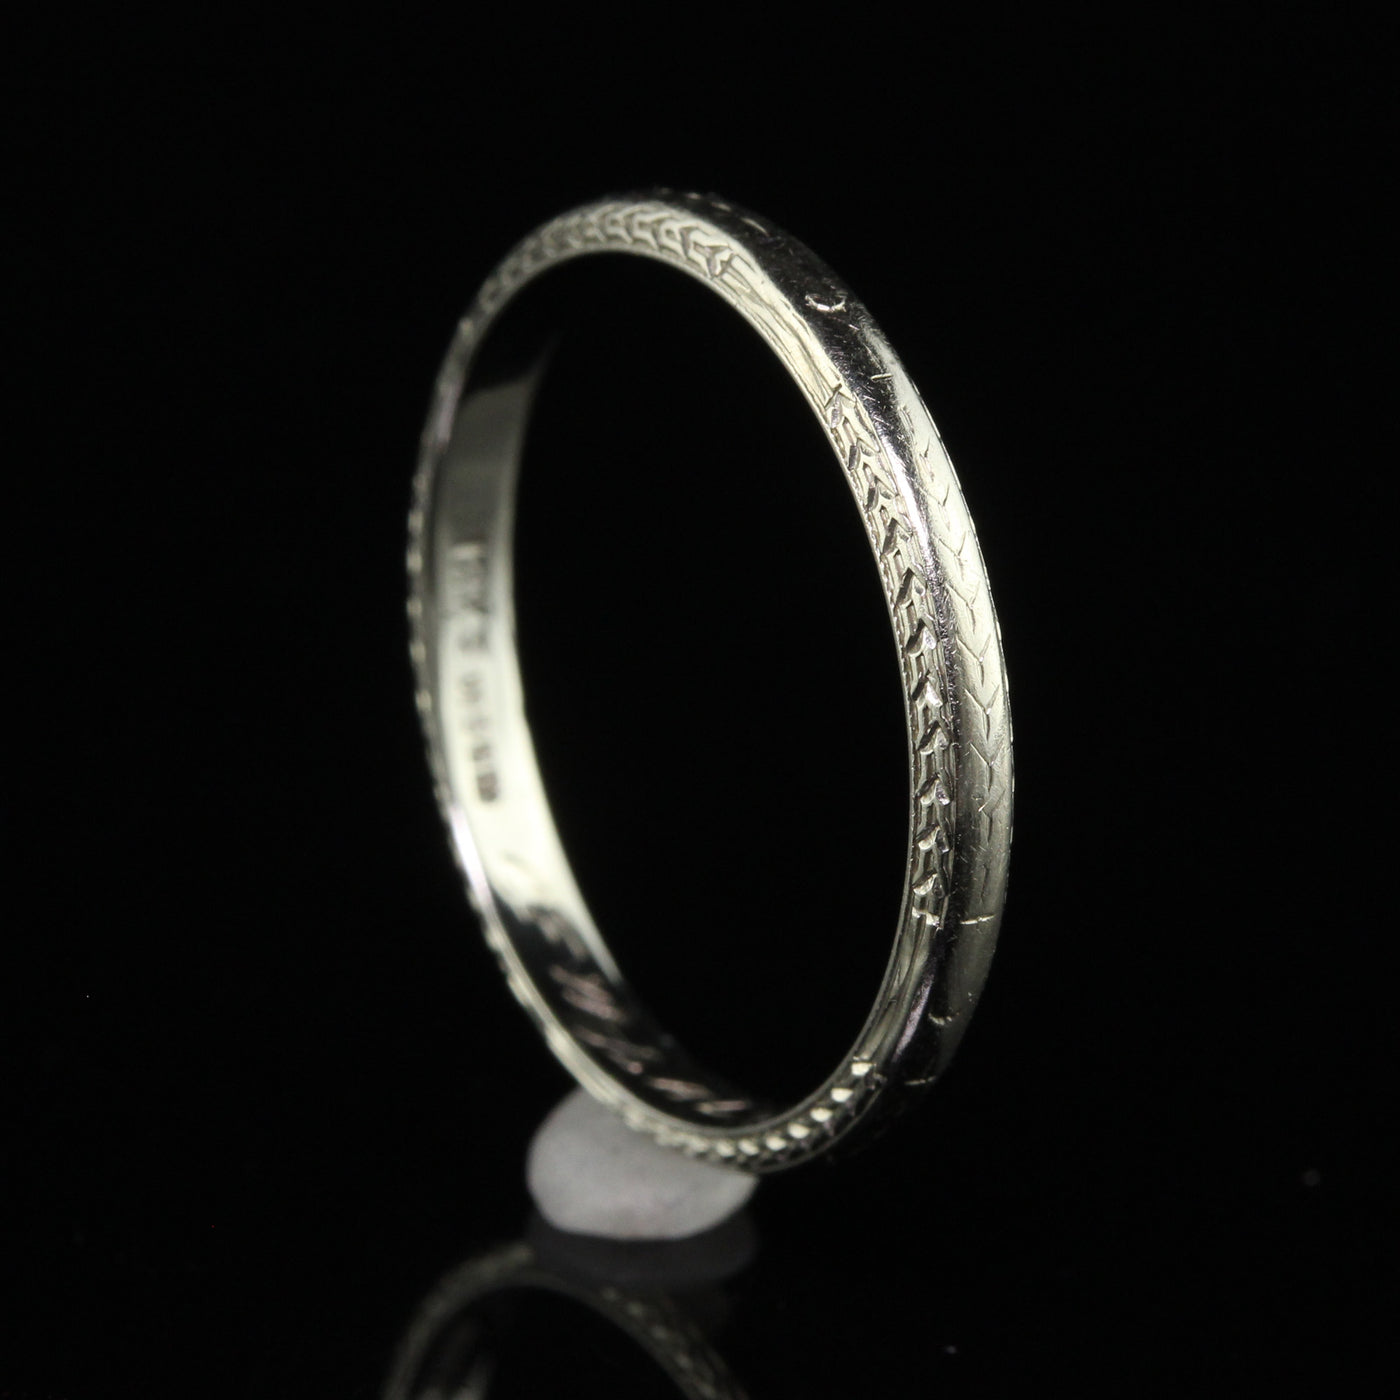 Antique Art Deco Wood and Sons 18K White Gold Engraved Wedding Band - Size 8